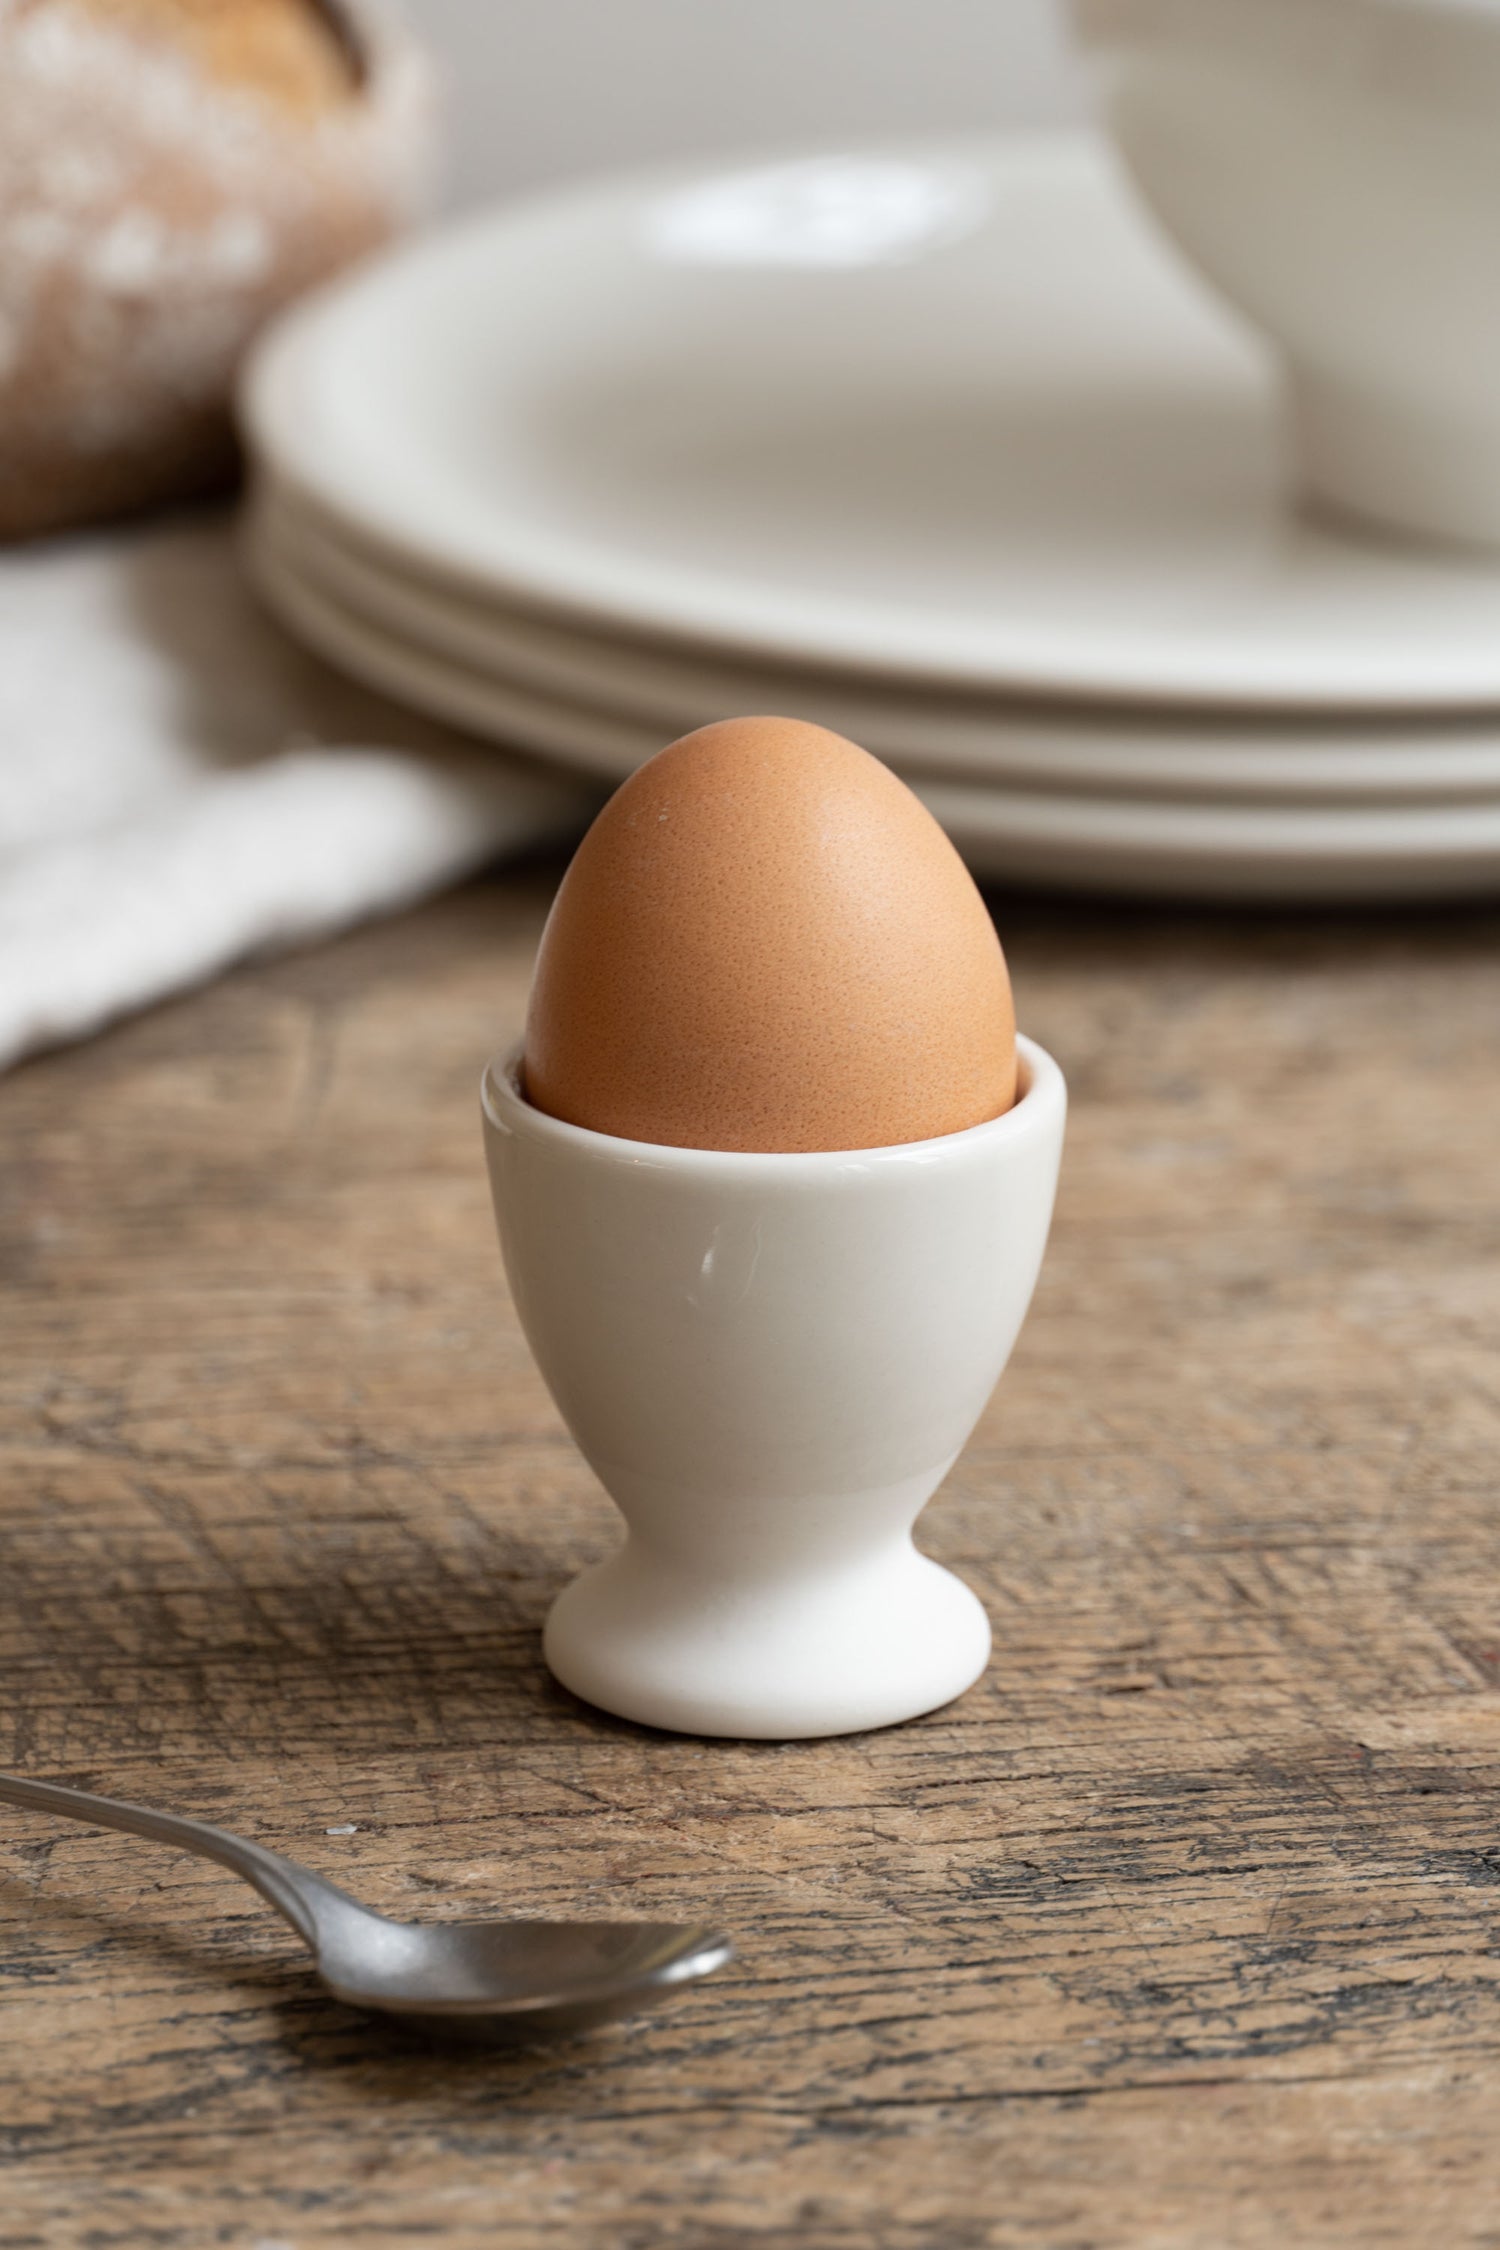 Antibes Egg Cup White by Jars Ceramistes.